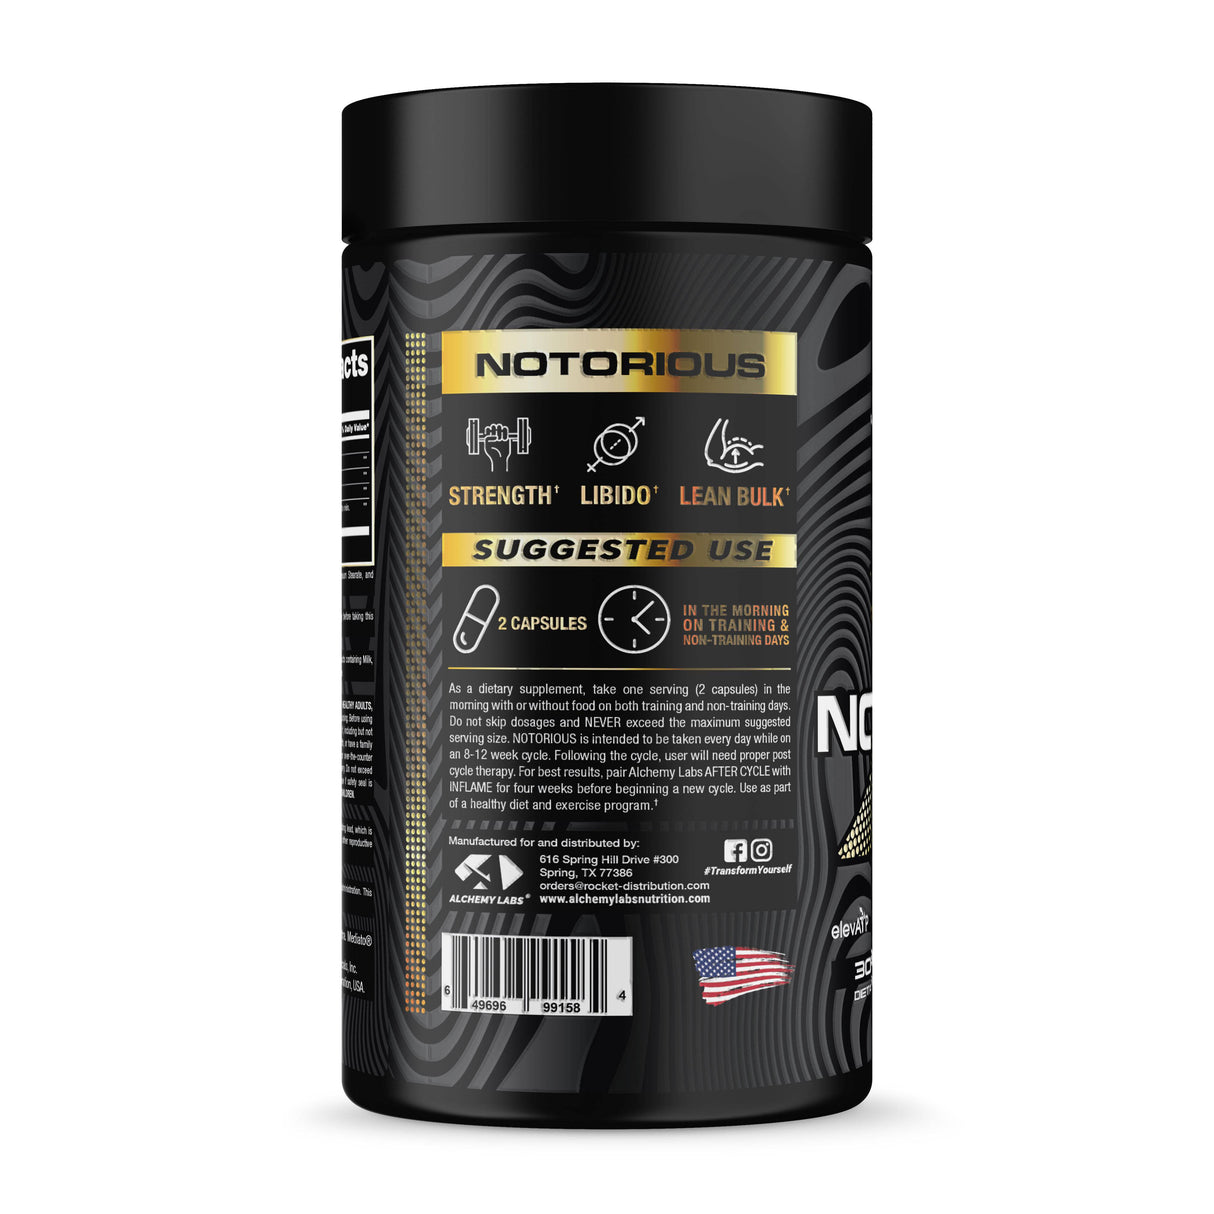 Notorious -Alchemy Labs - Prime Sports Nutrition